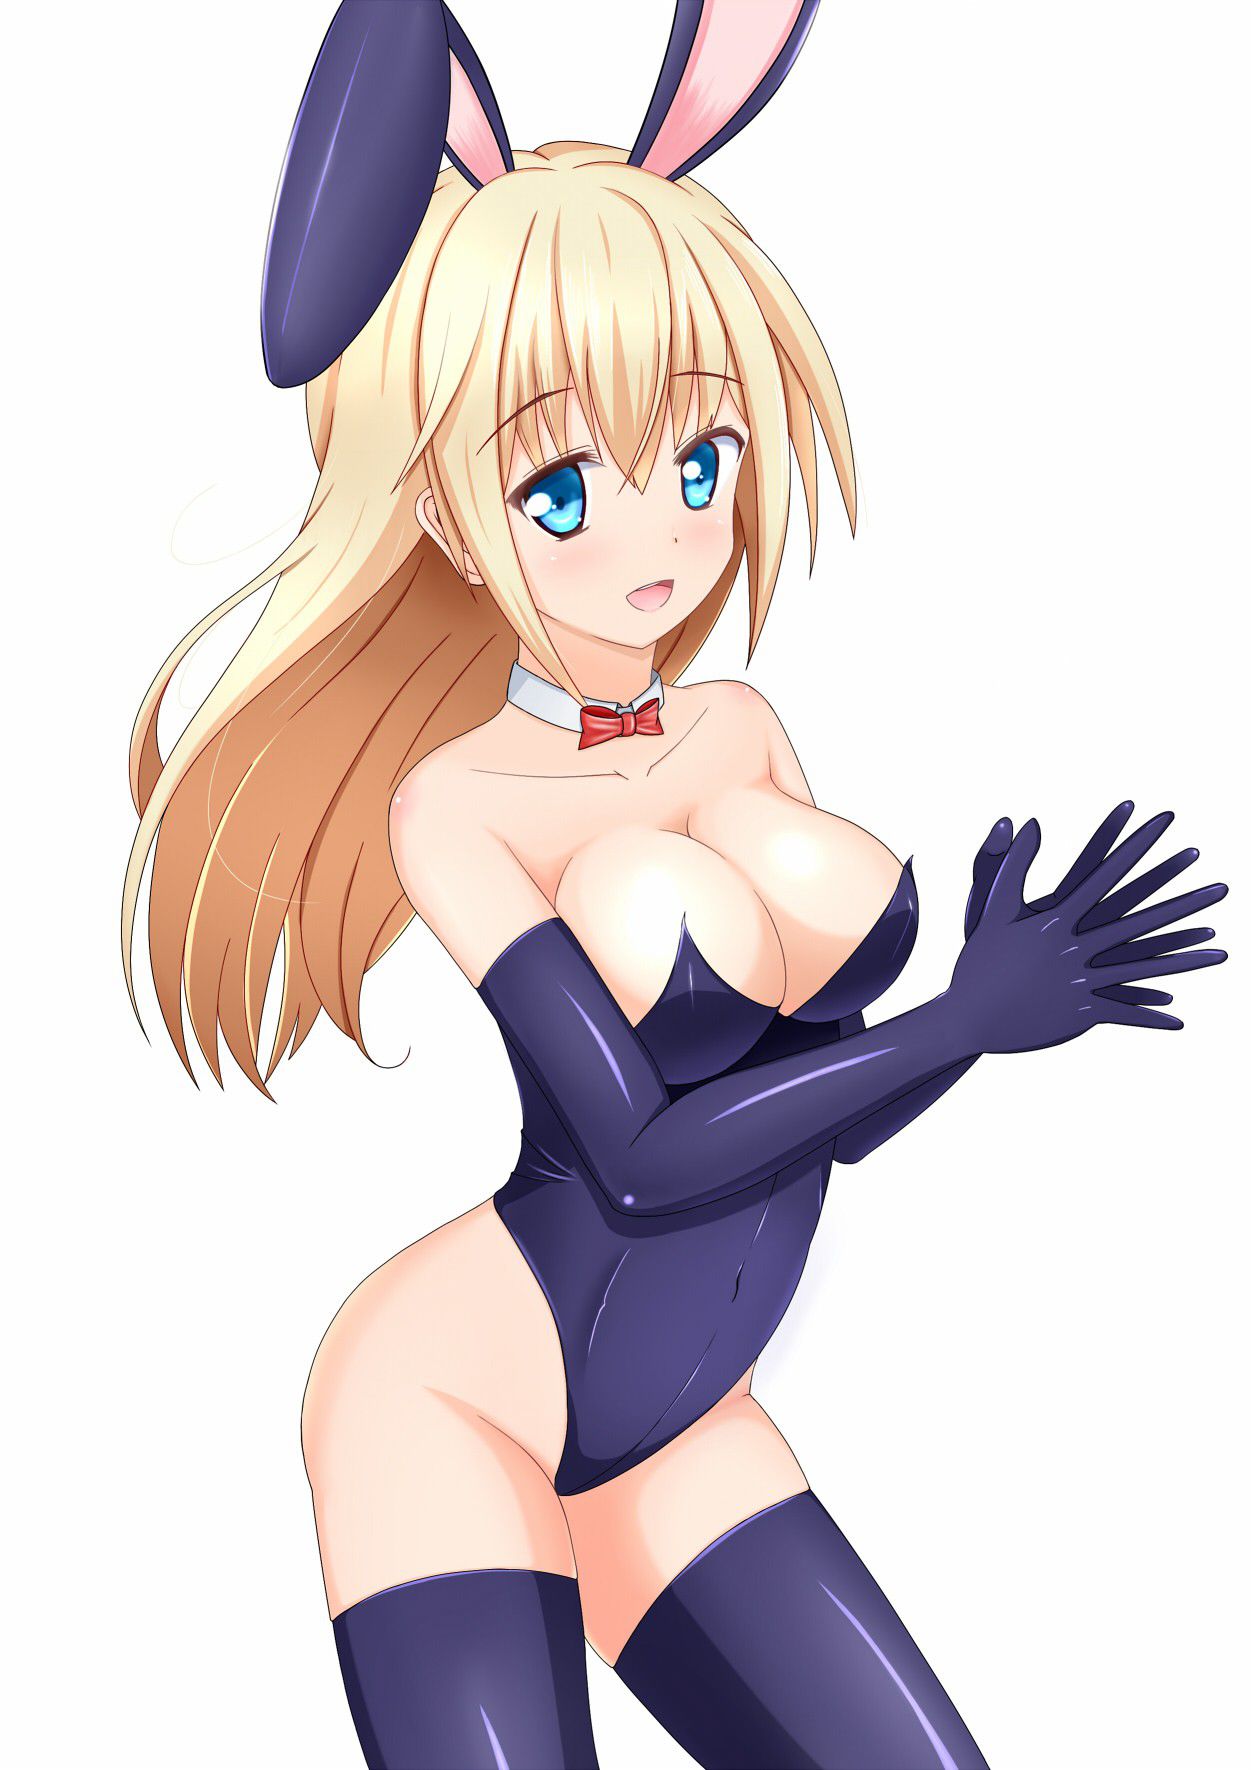 [the second] Eroticism image of the bunny girl that a high leg-cut bathing suit cutting into buttocks and オマンコ is スケベ 2